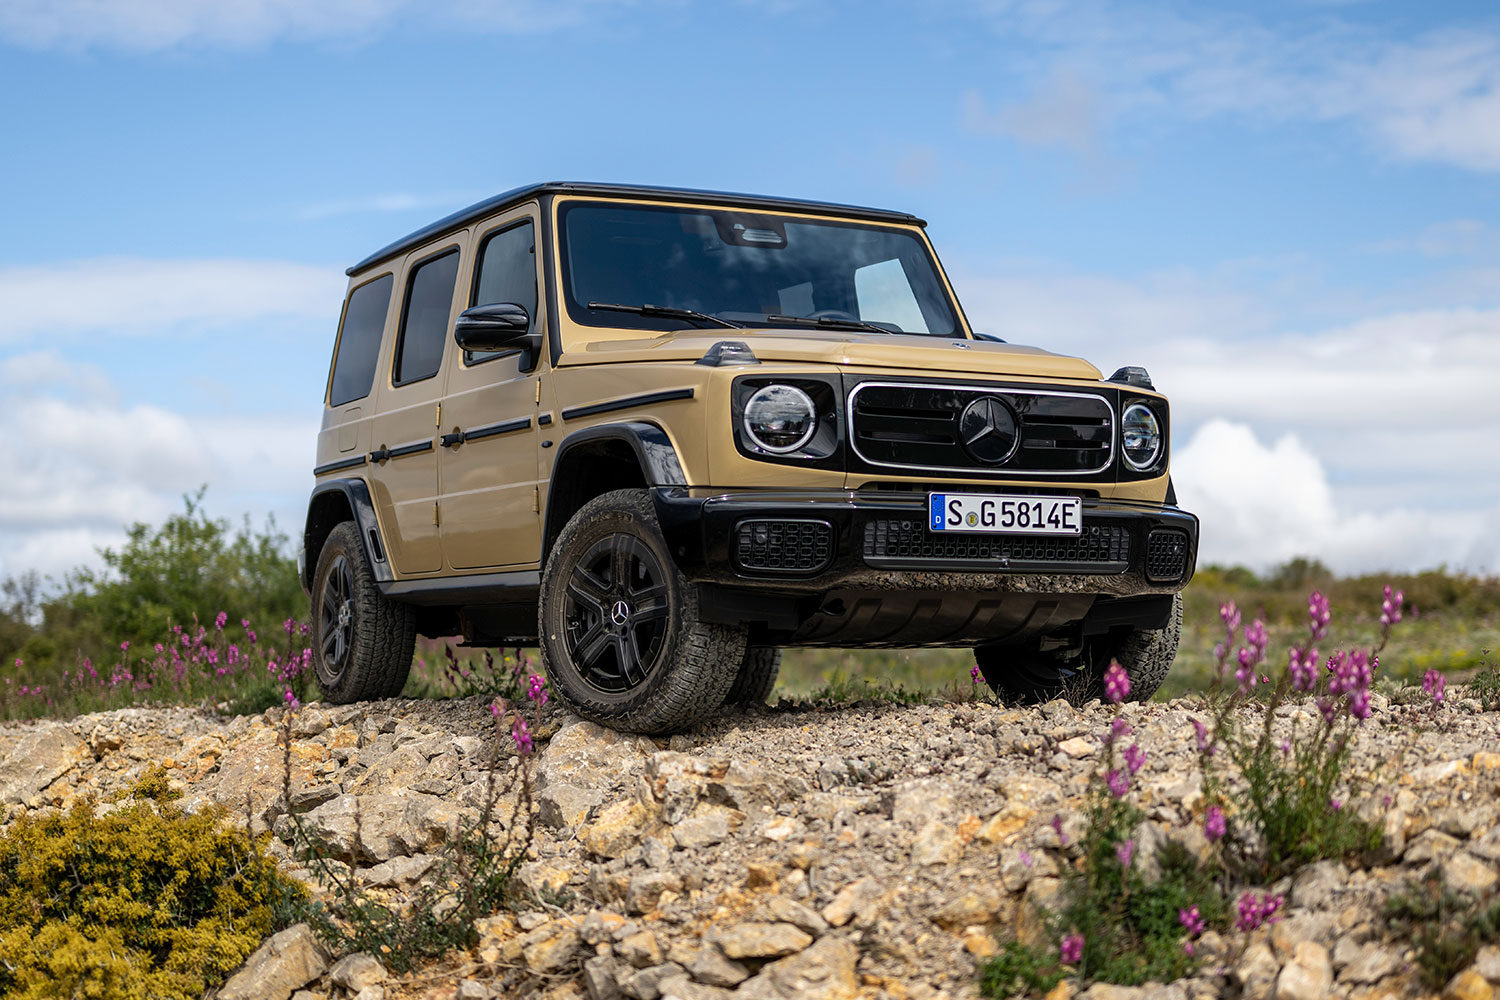 Mercedes-Benz G 580 with EQ Technology, the first electric G-Class SUV, also known as the G-Wagen